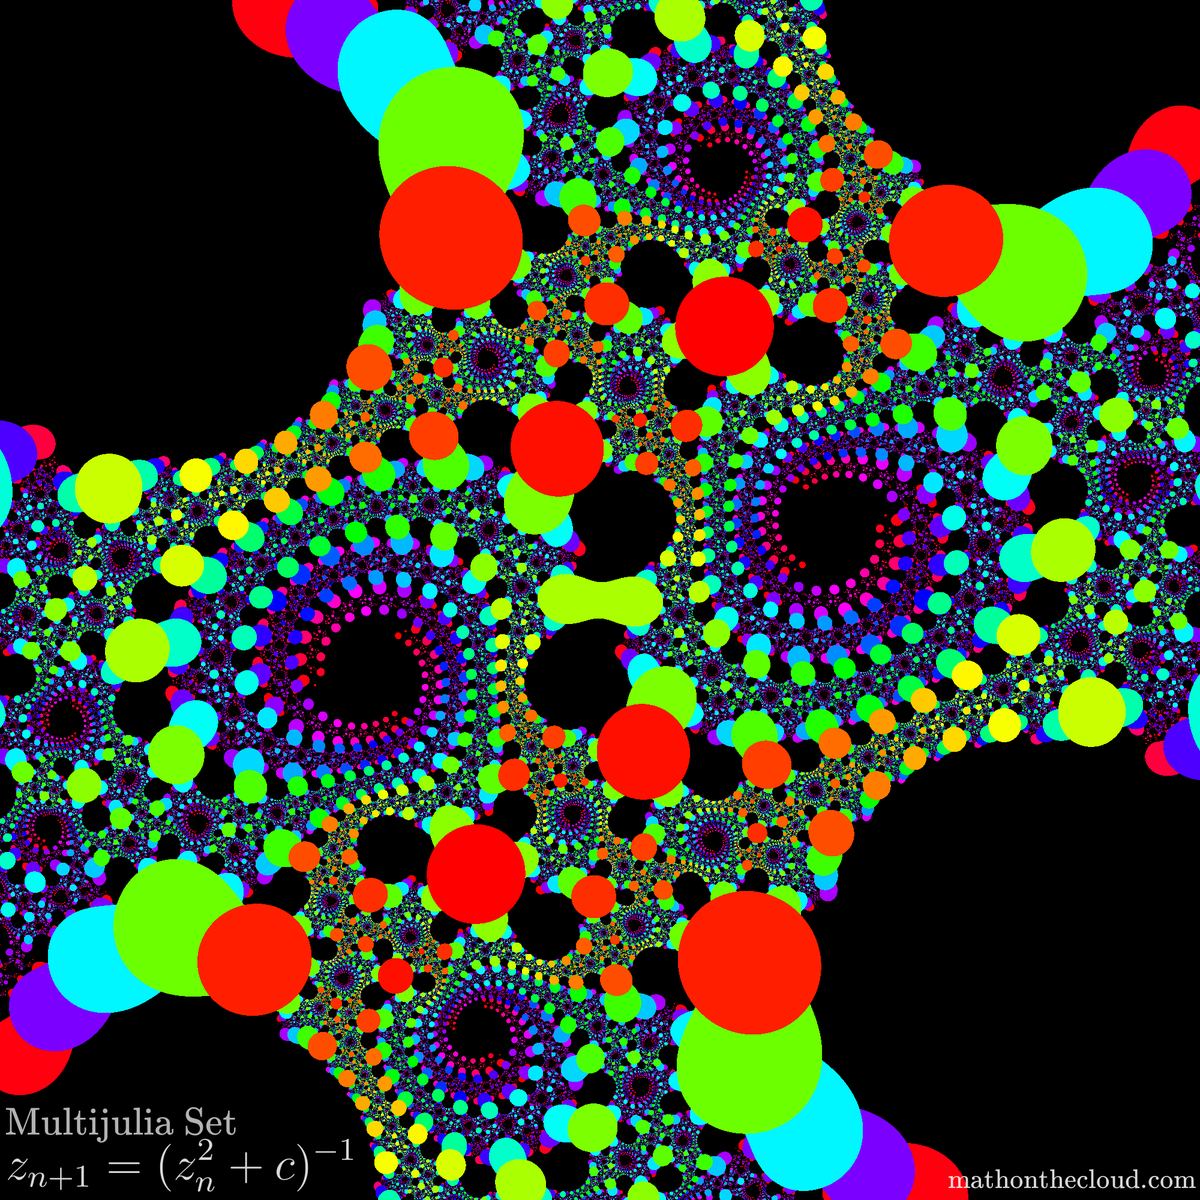 Math is beautiful! Discover how simple equations can craft a world of wonderful shapes and colors with Math on the Cloud!

Image created with our Julia/Multijulia set plotting tool at mathonthecloud.com/fractal/julia !

#fractal #fractalart #cool #art #design #cgi #colors